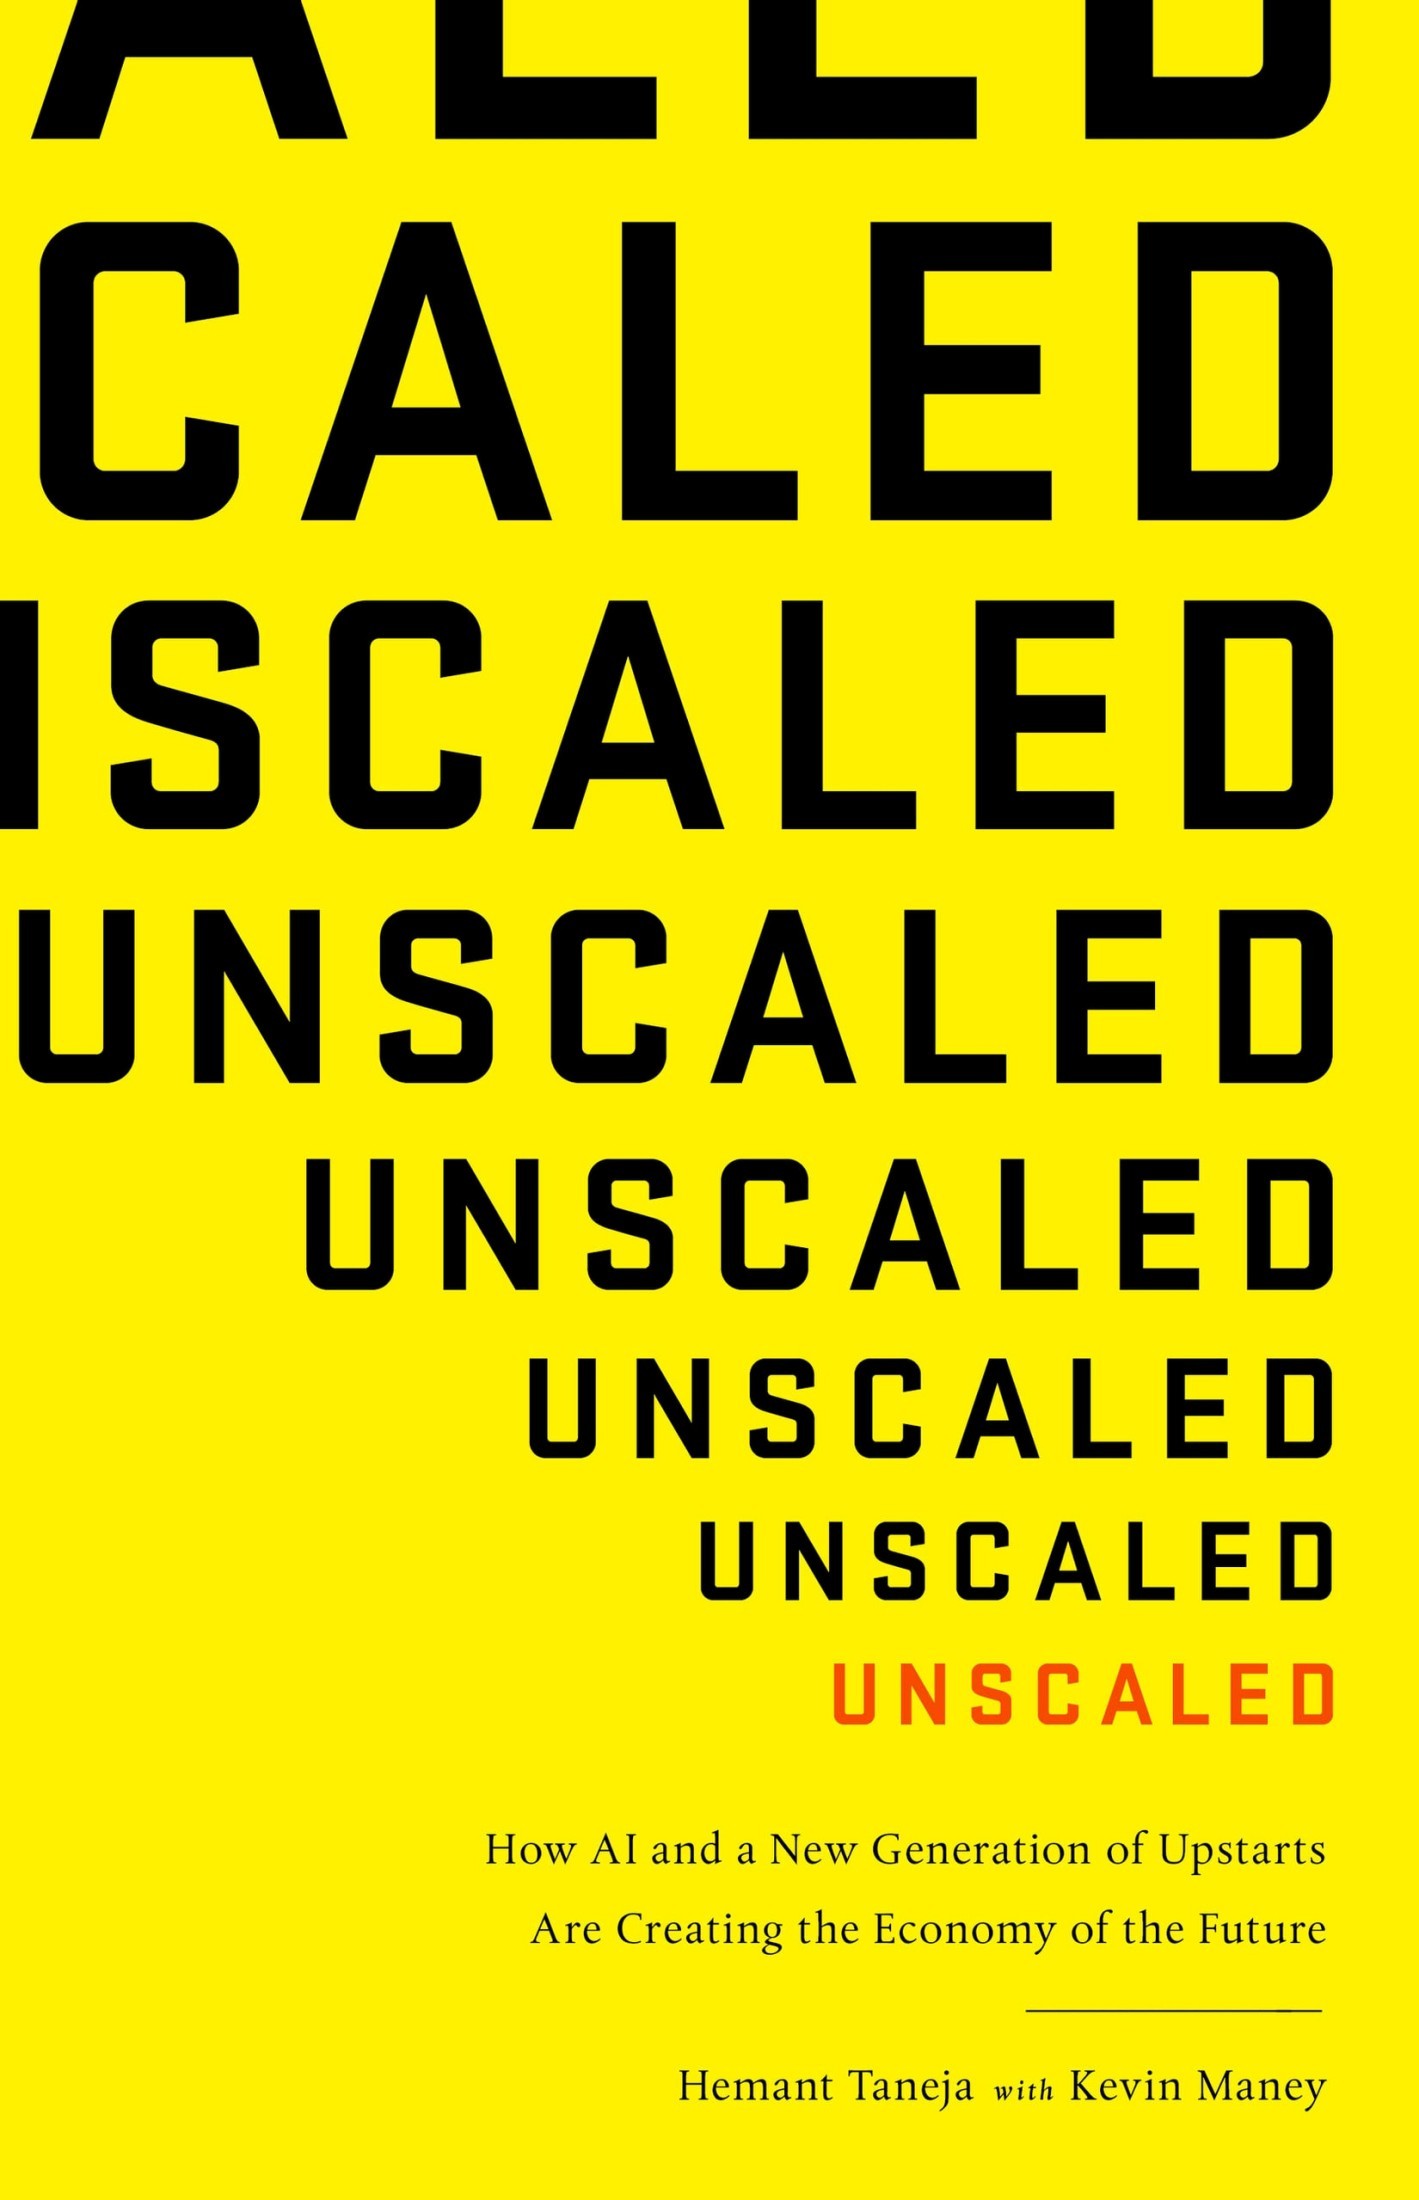 Unscaled - How AI and a New Generation of Upstarts Are Creating the Economy of the Future